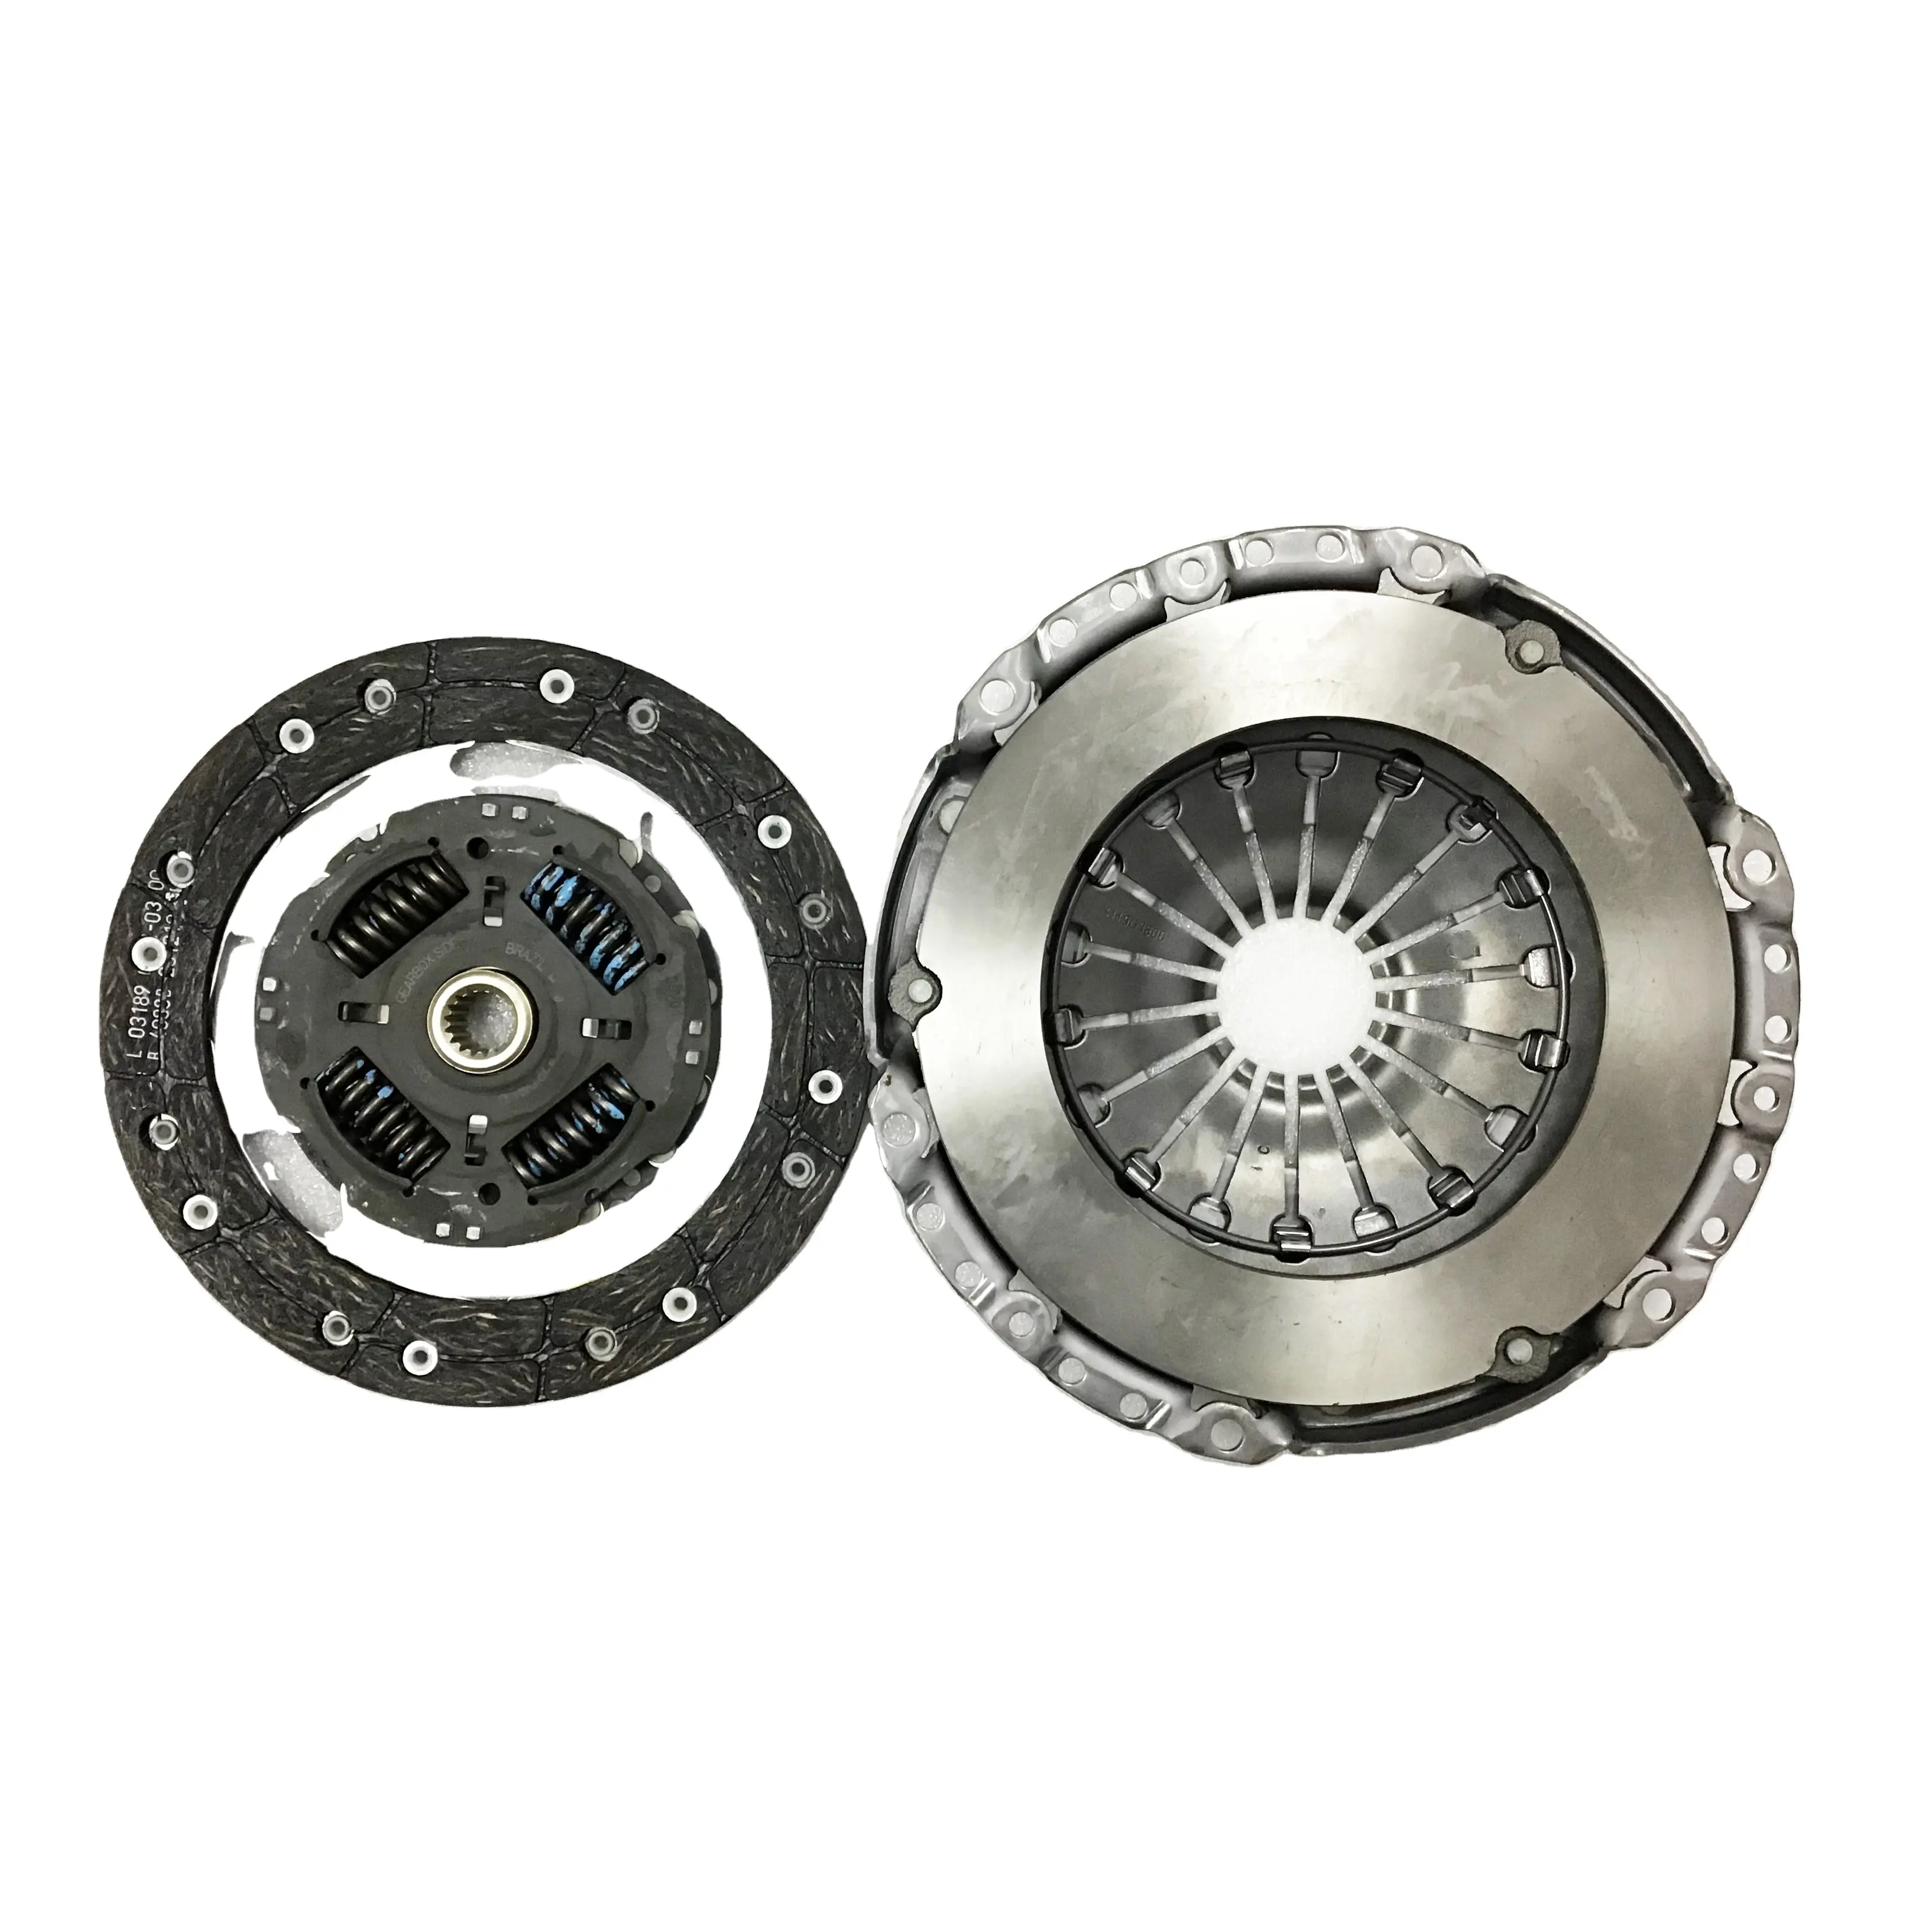 Original Quality Other Auto Engine Parts 2PCS 3M51-7540-H1D Clutch Kit For Ford Fiesta 2013 MT Ecosport 1.0 2013